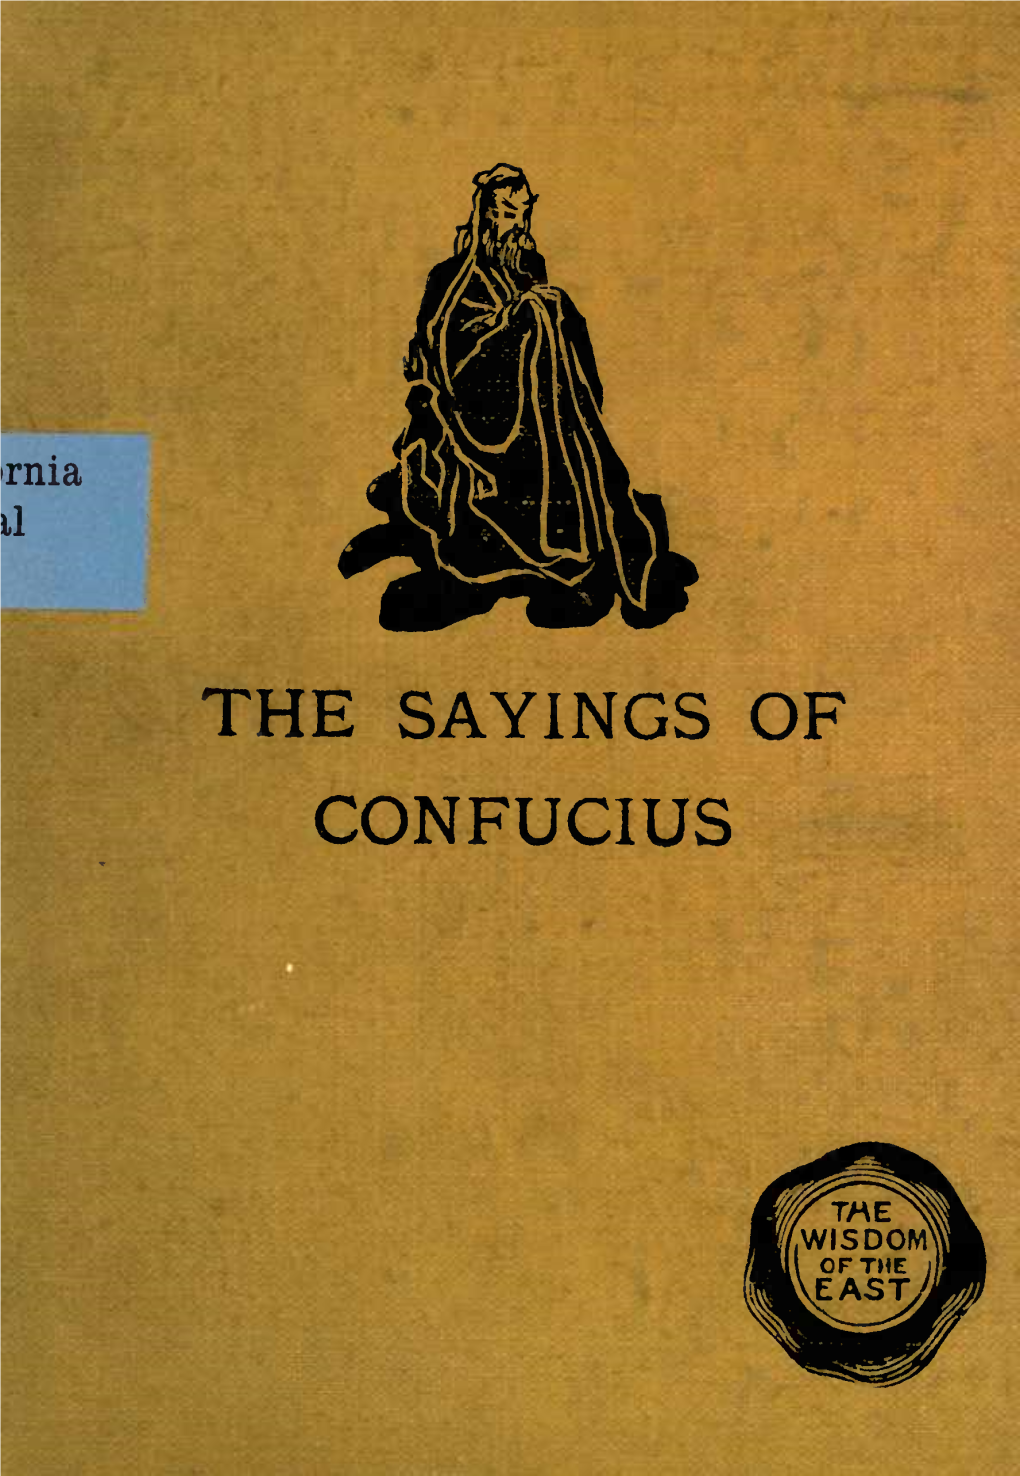 The Sayings of Confucius the Library of the University of California Los Angeles